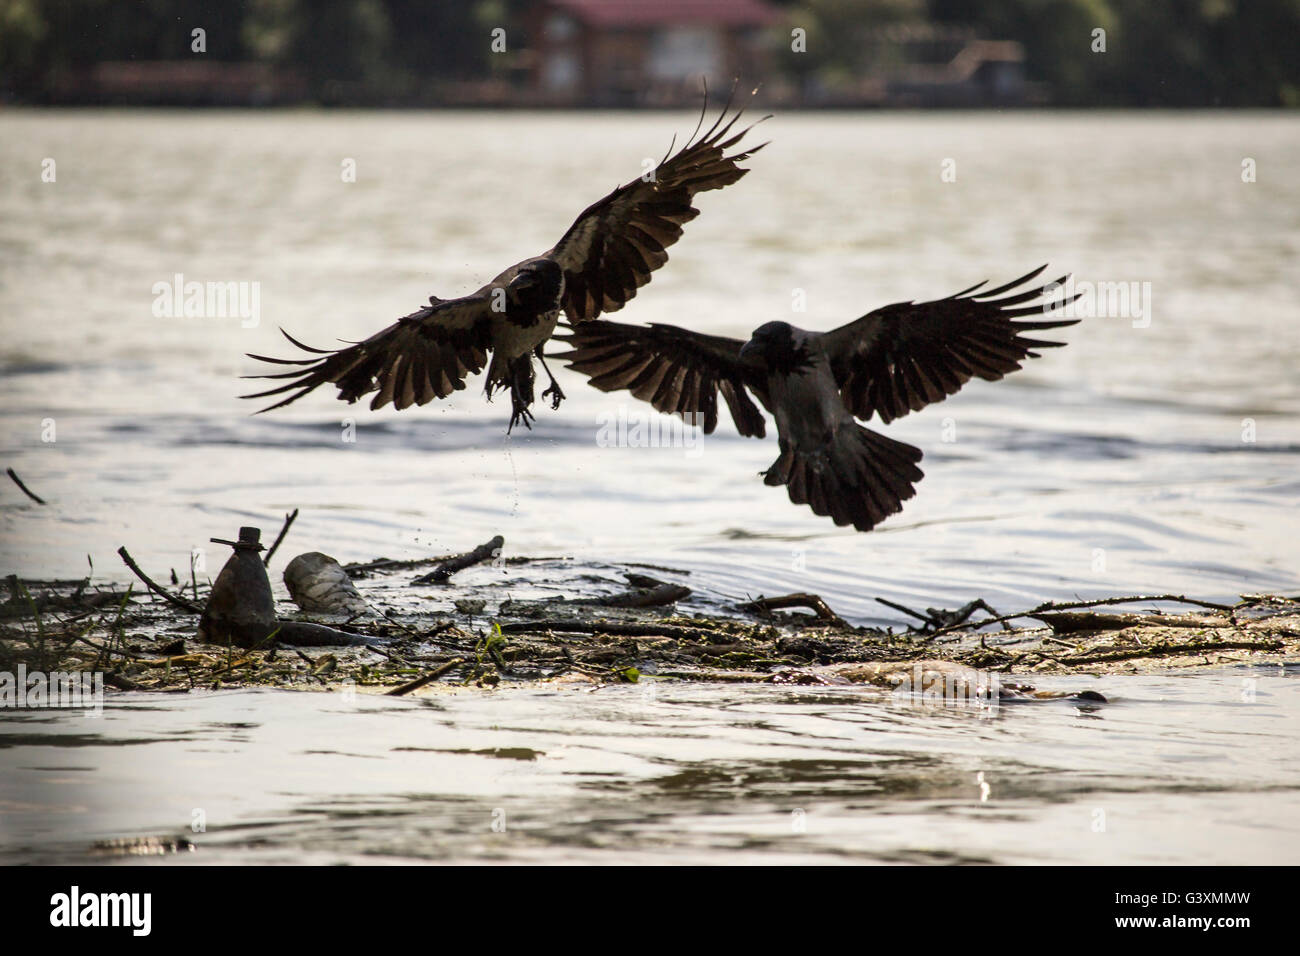 Danube, Serbia - Two hooded crows (Corvus cornix) flying over floating trash Stock Photo